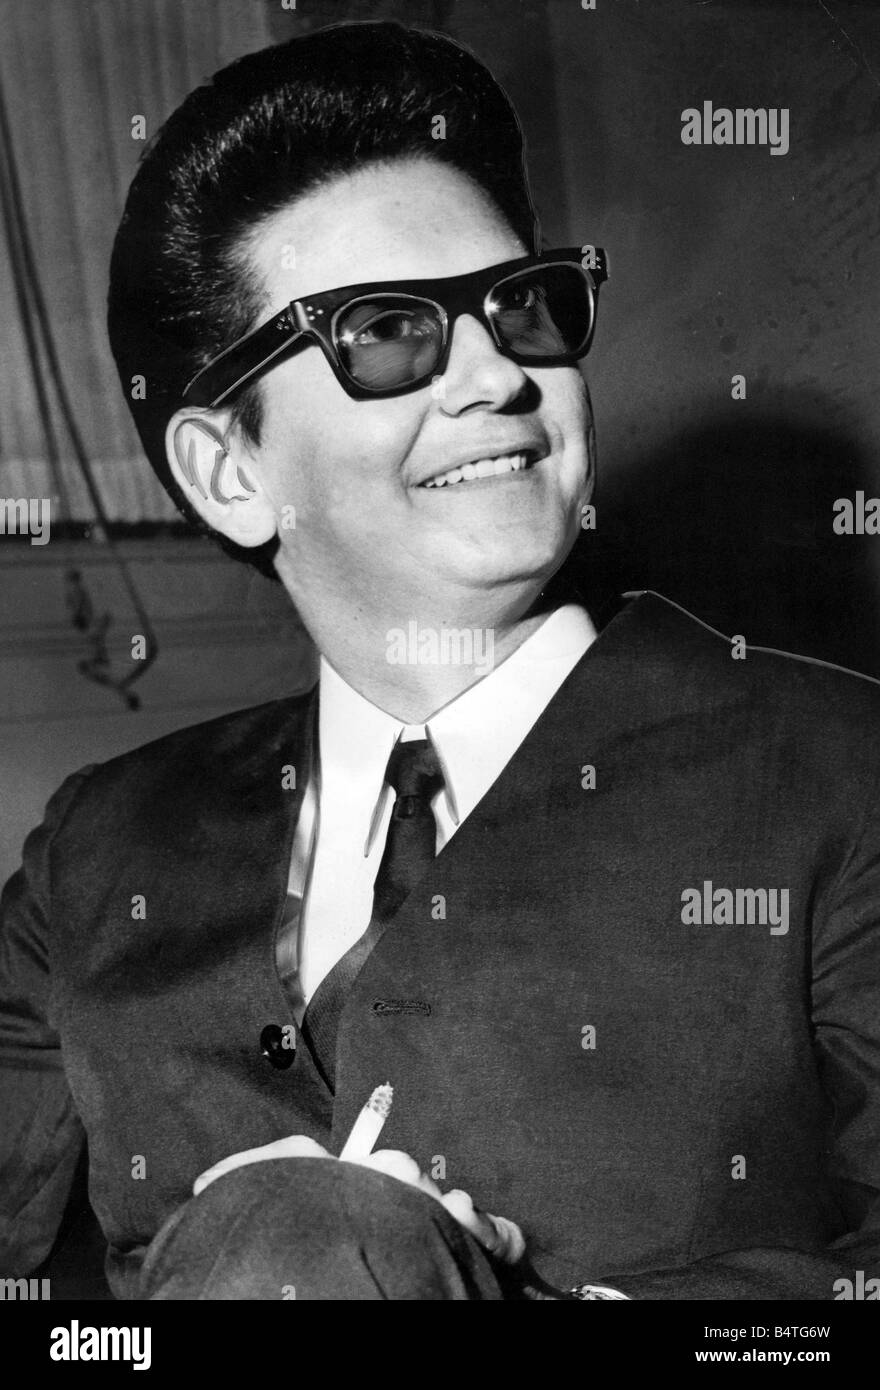 Roy Orbison the American pop singer relaxes between appearances at ...